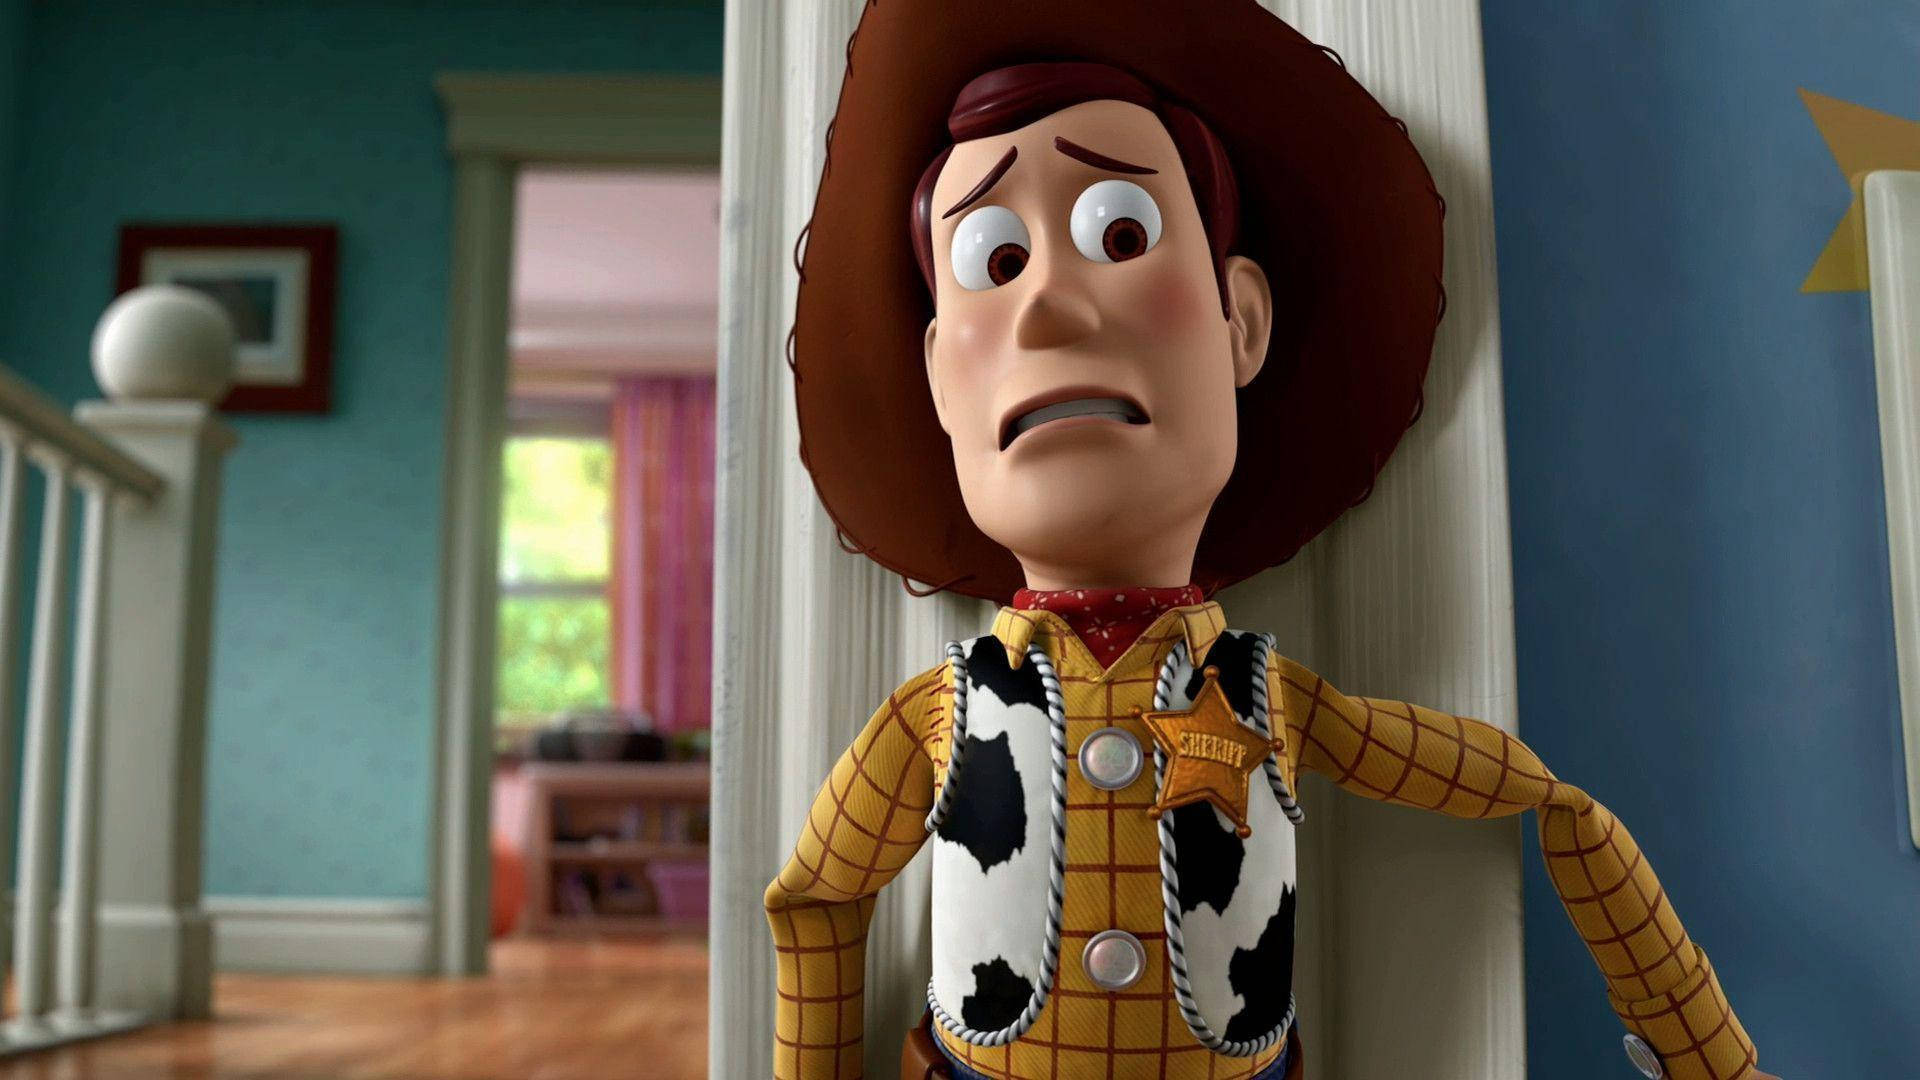 Woody Wallpaper Images